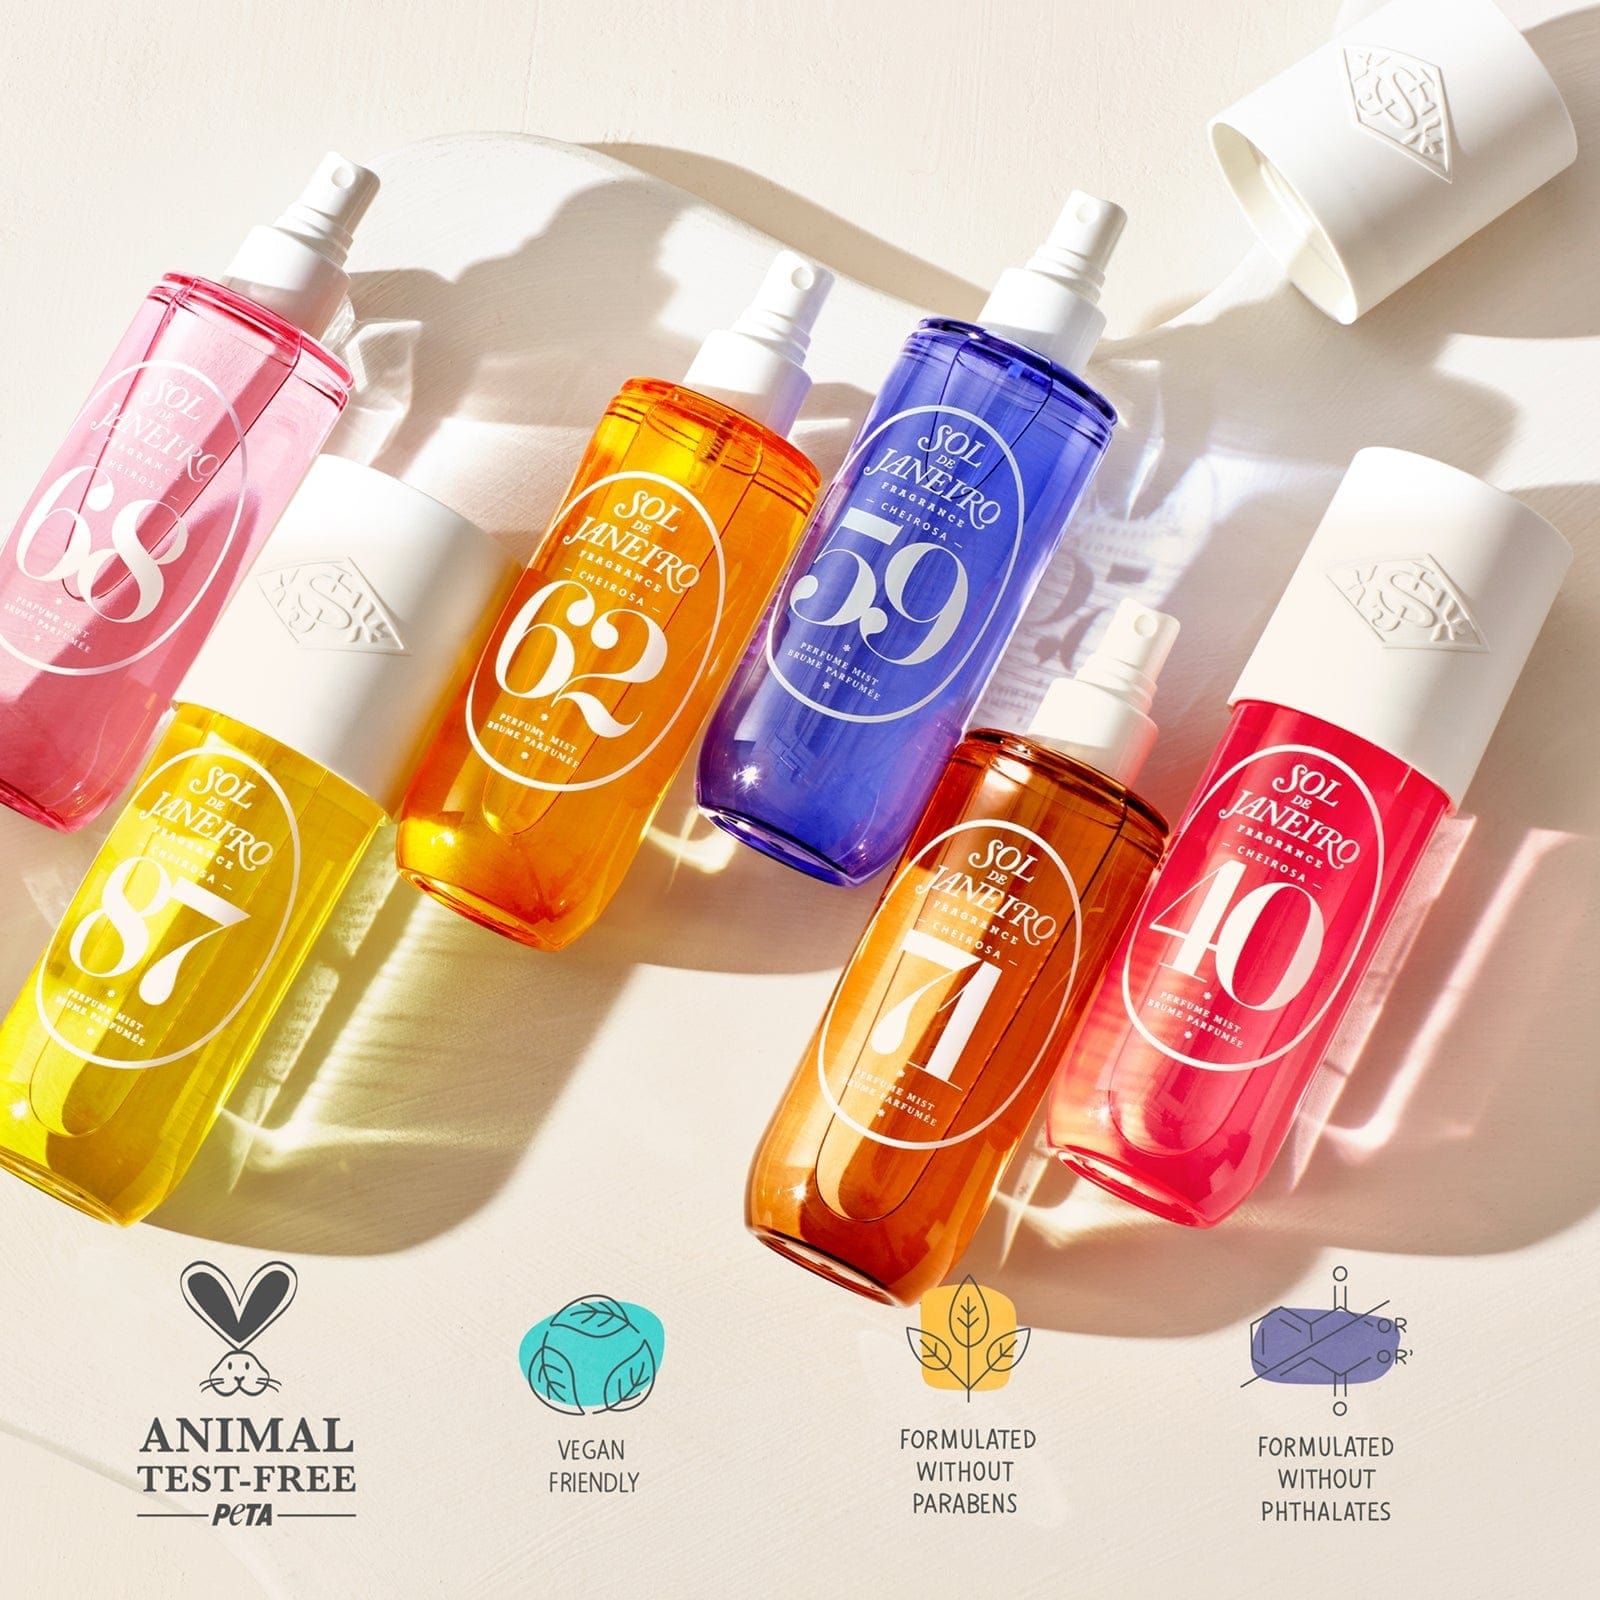 Animal test-free PETA. Vegan friendly and formulated without parabens and phthalates